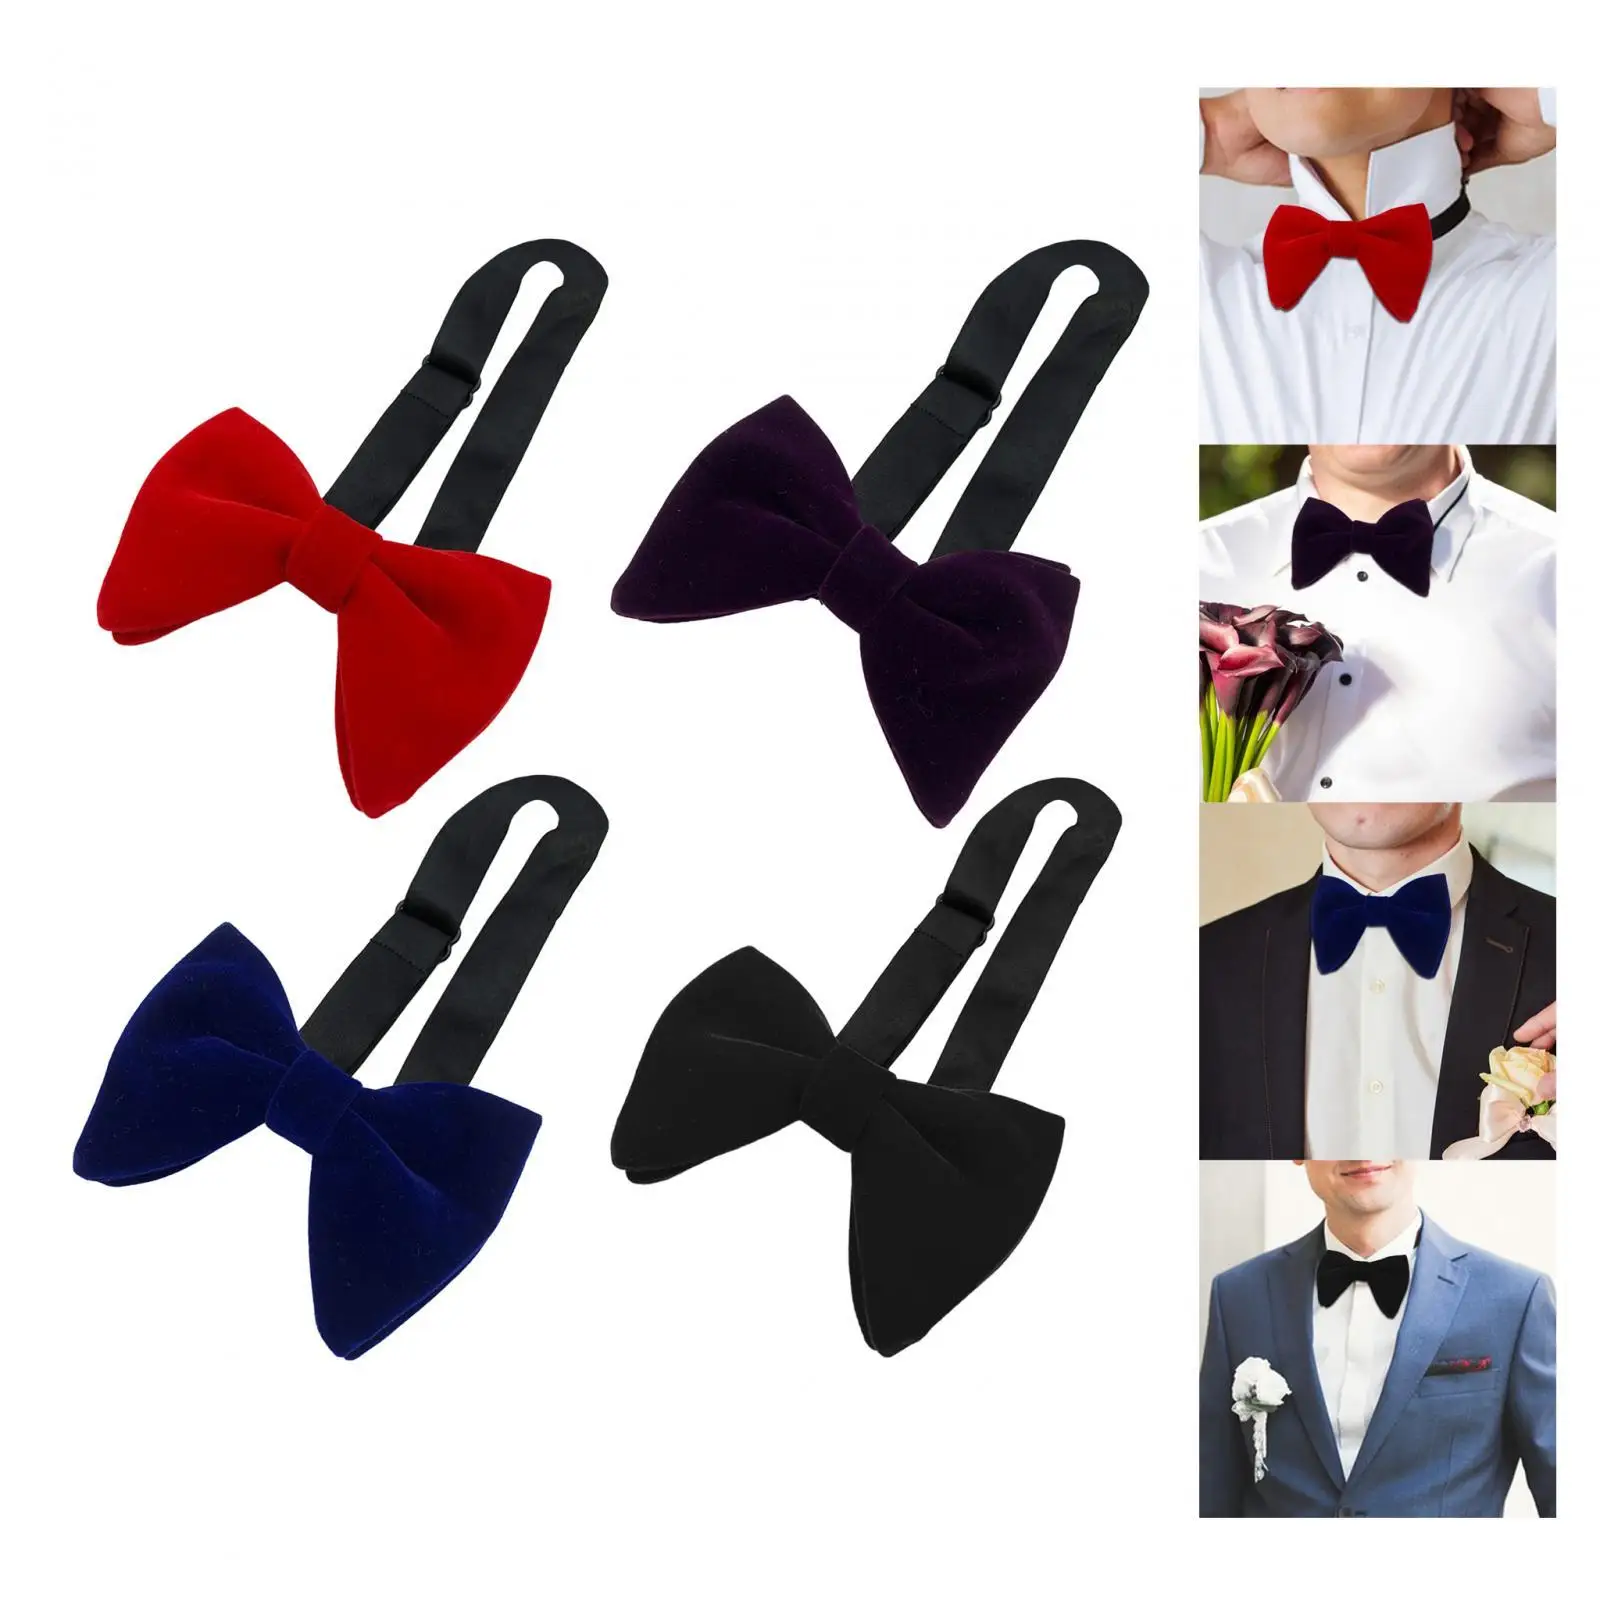 Men`s Velvet Bow Tie Big Bow Tie for Adults Elegant Adjustable Bowtie Oversized Bow Tie for Party Tuxedo Business Groom Gift